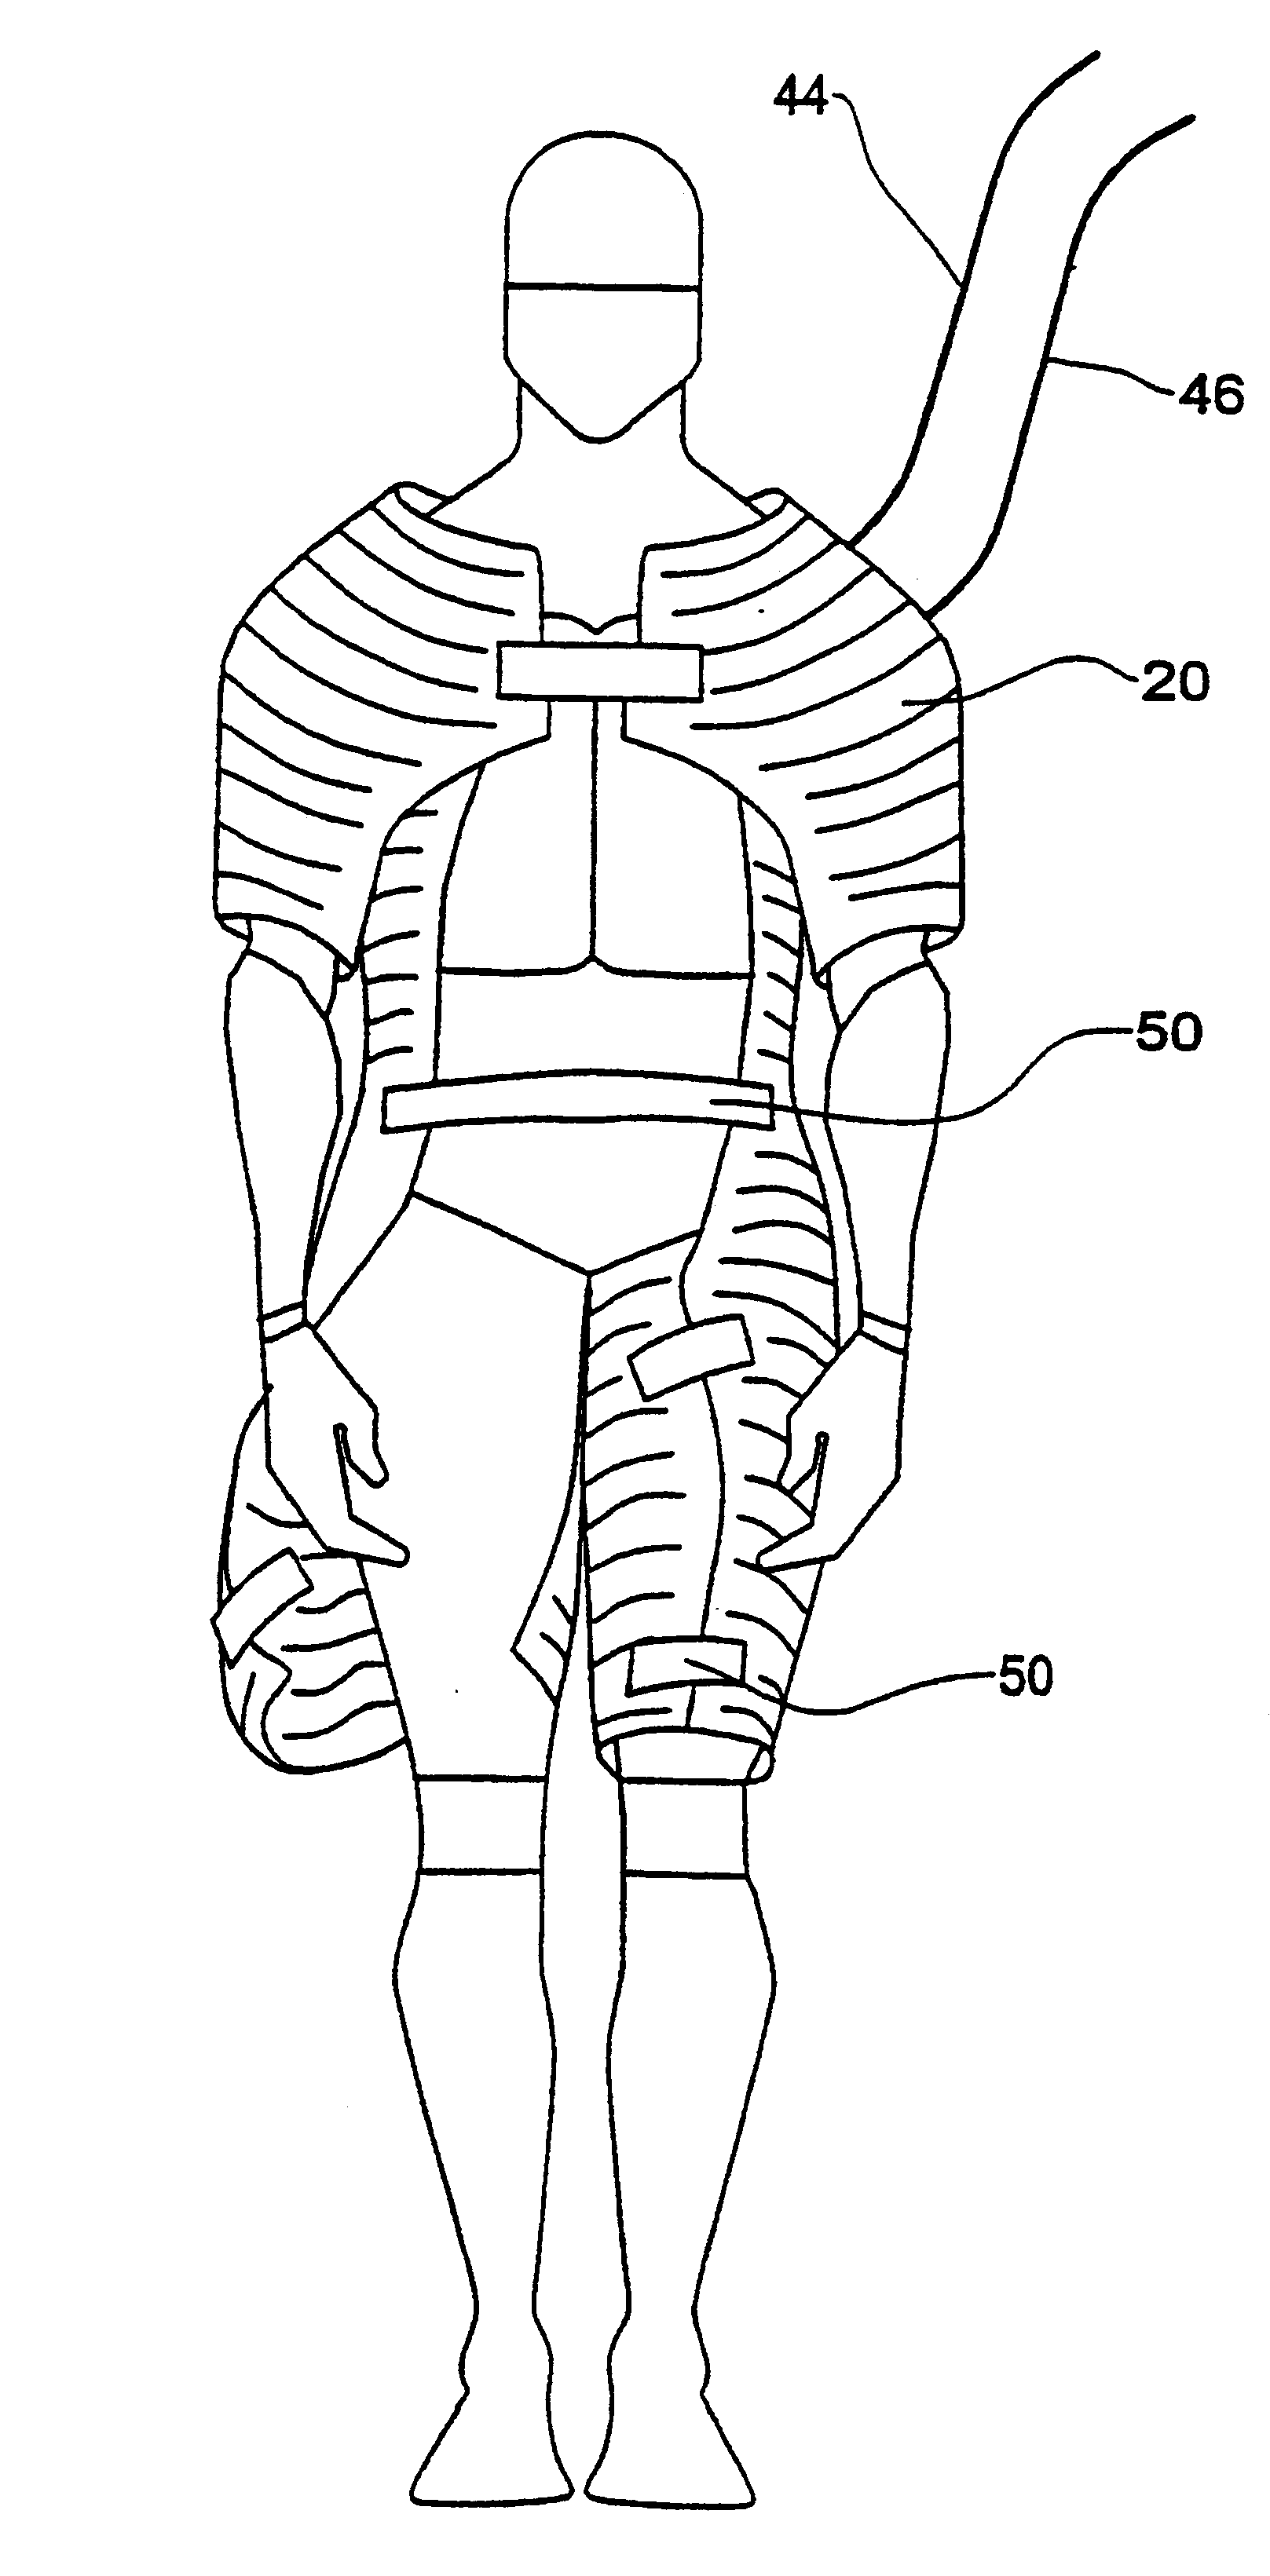 Method and system for improving cardiovascular parameters of a patient